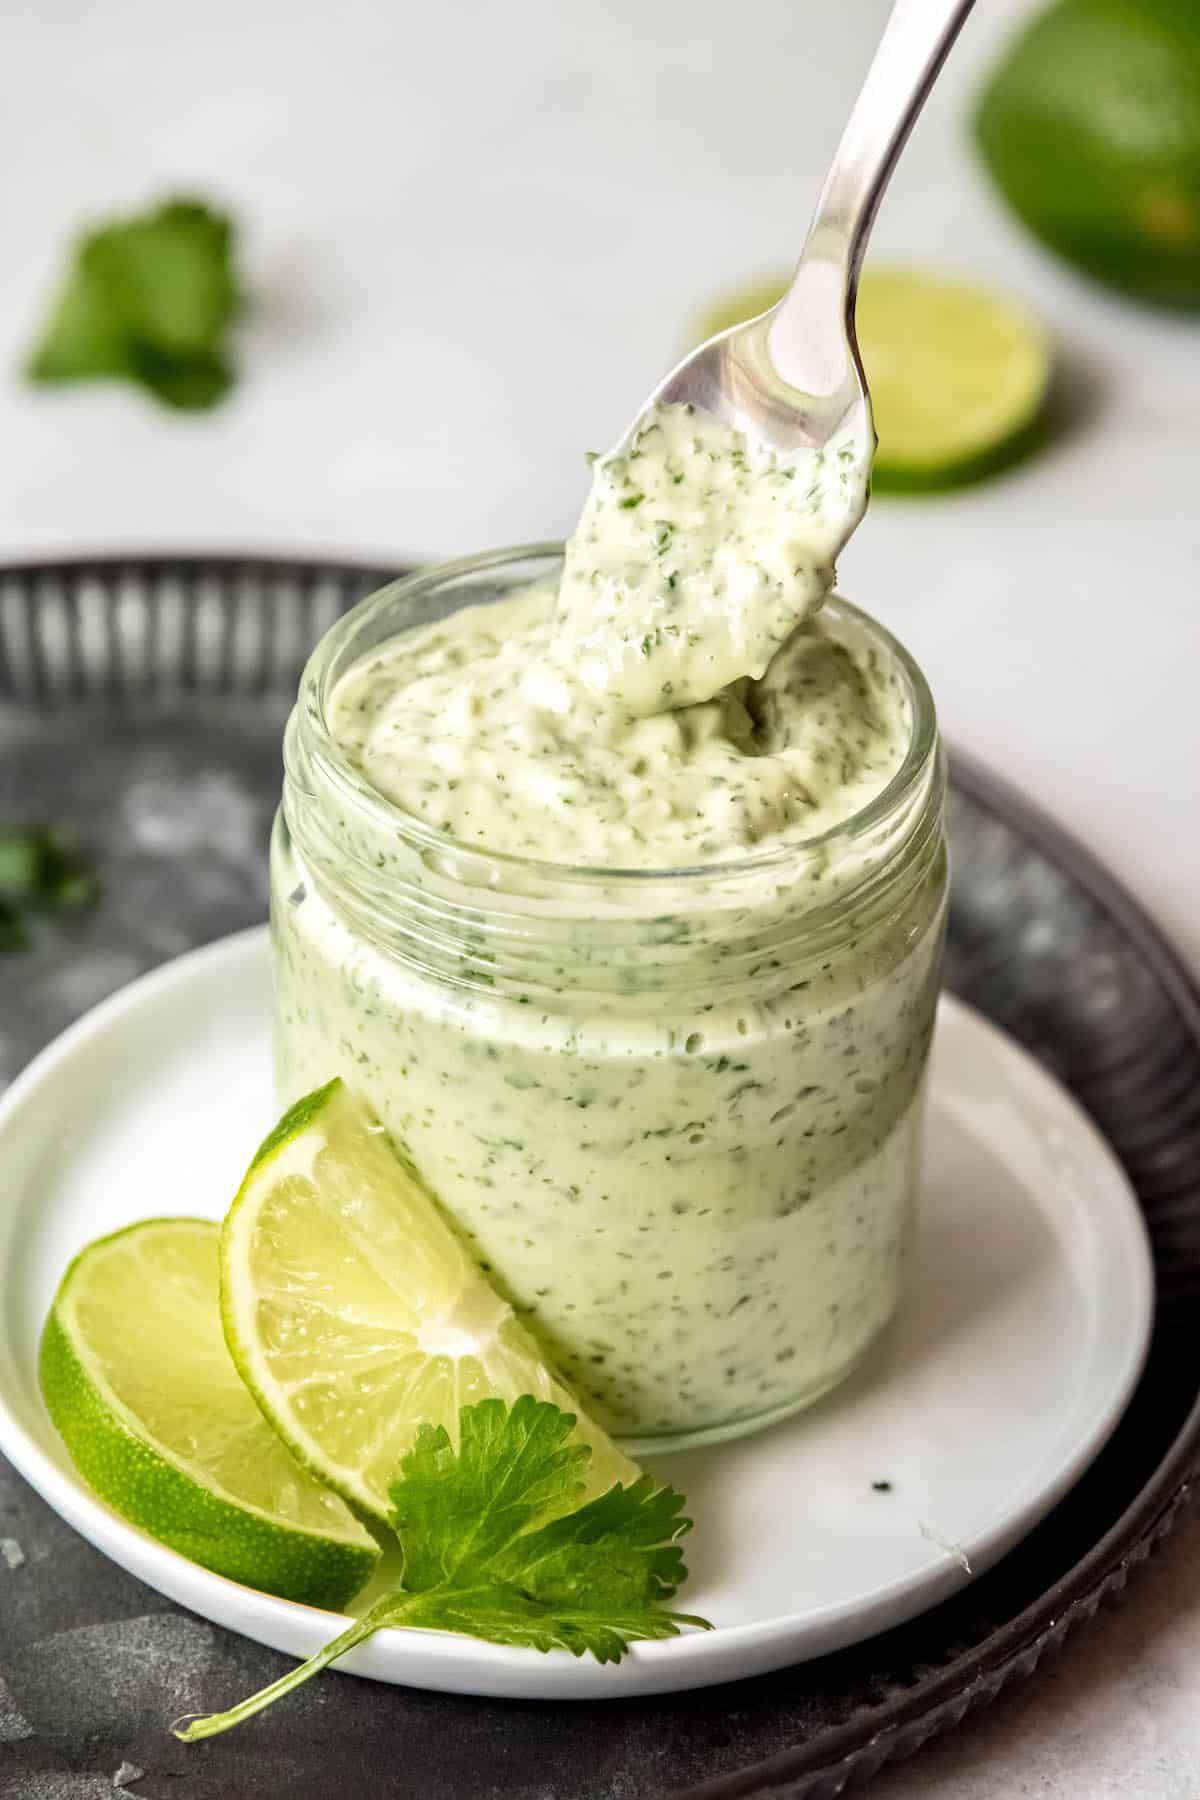 silver spoon taking a dollop of creamy cilantro garlic sauce out of the jar.